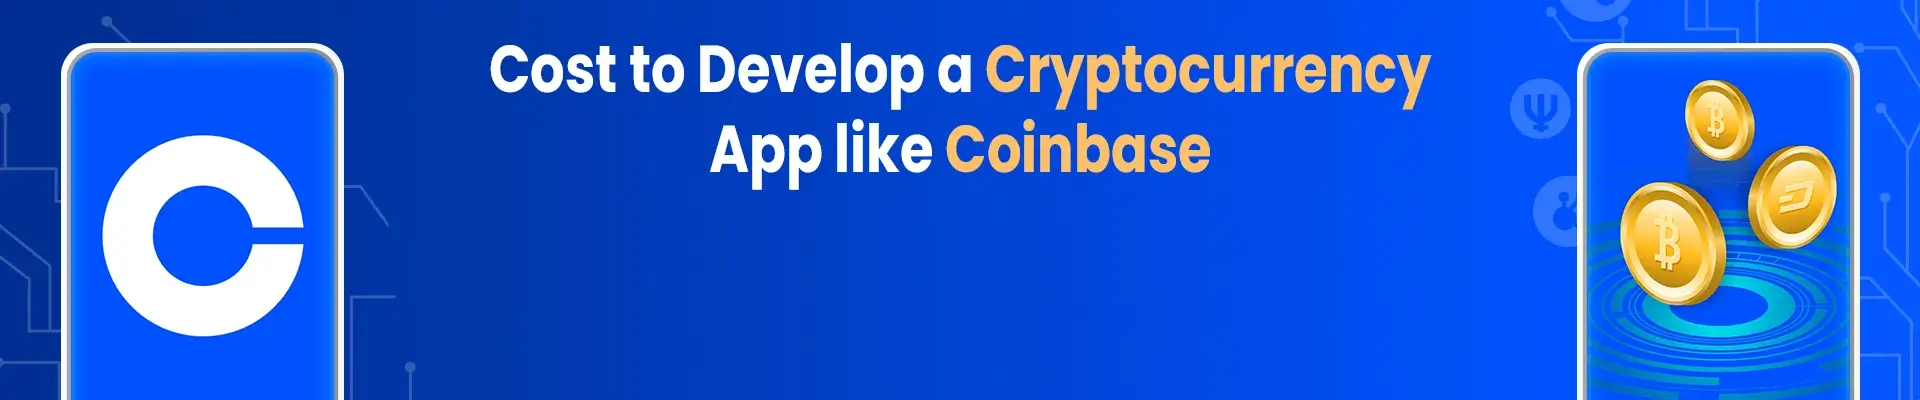 How Much Does It Cost to Create a Cryptocurrency App like Coinbase? [2021]